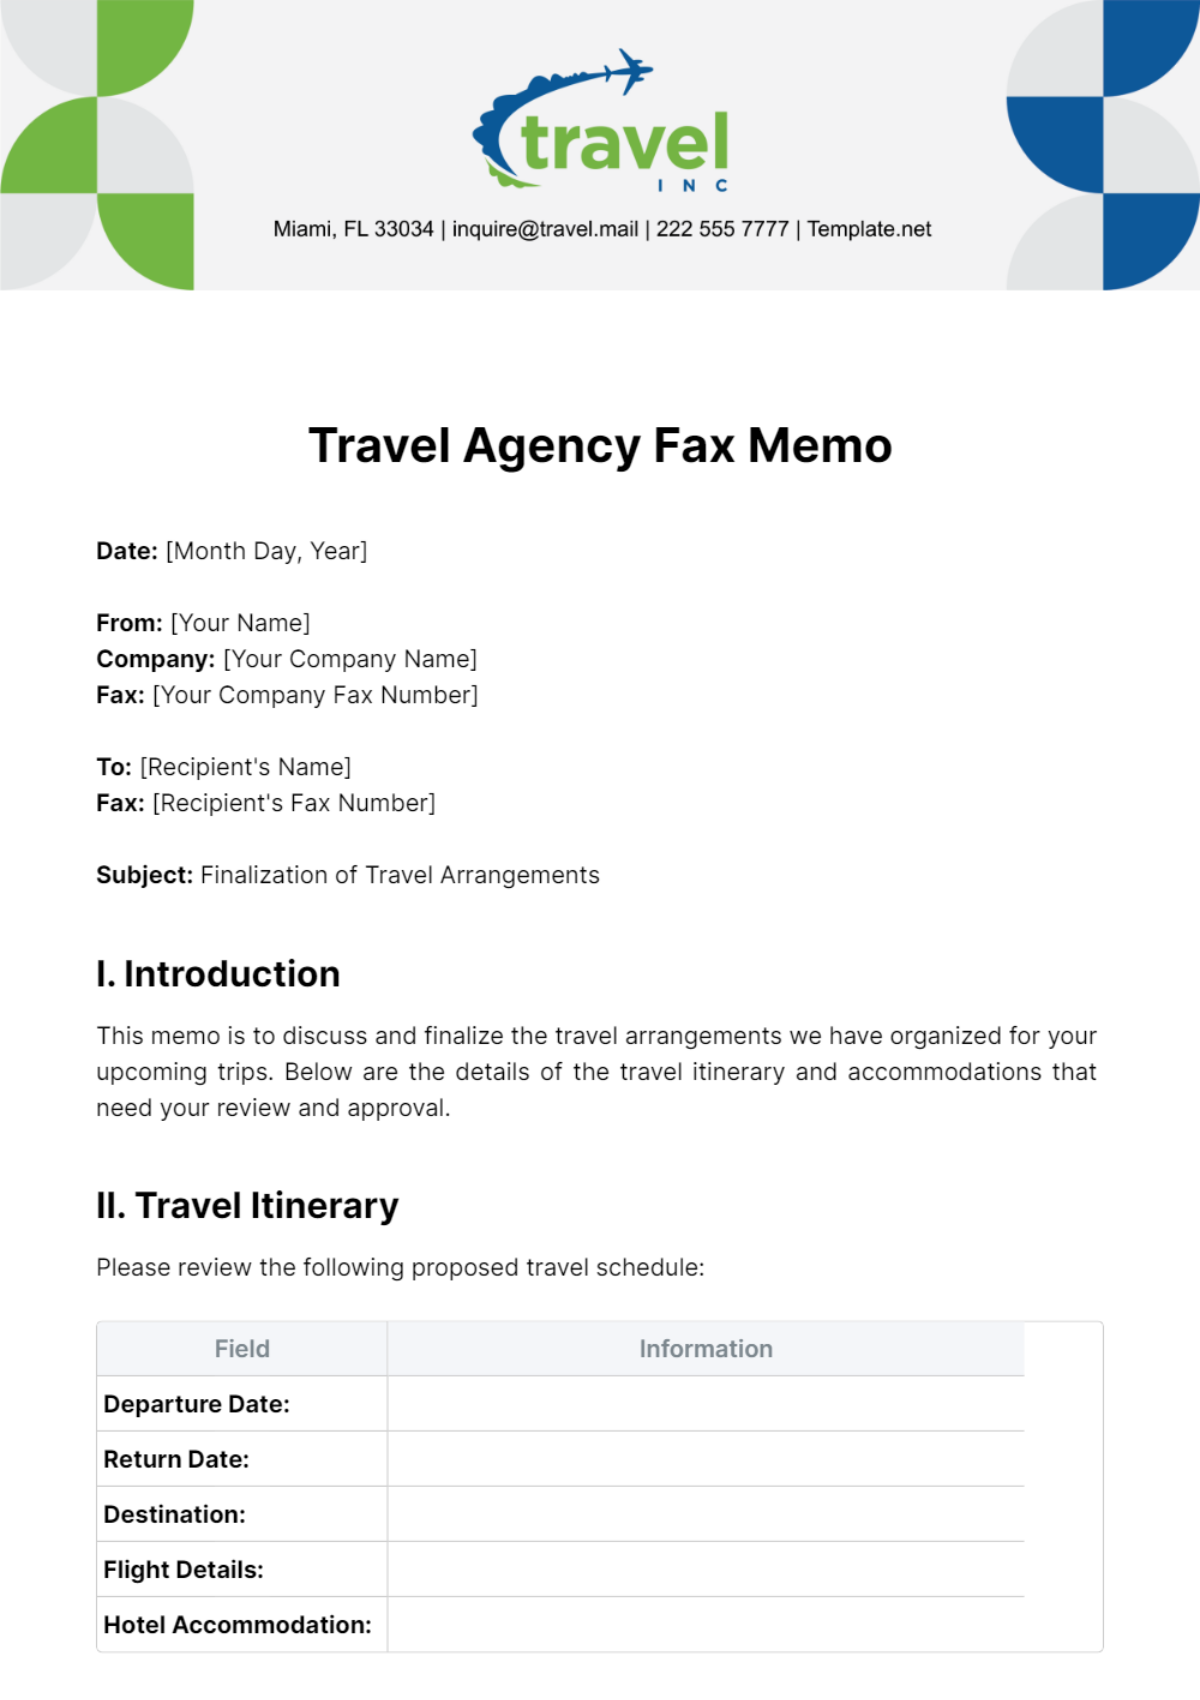 Free Travel Agency Fax Memo Template